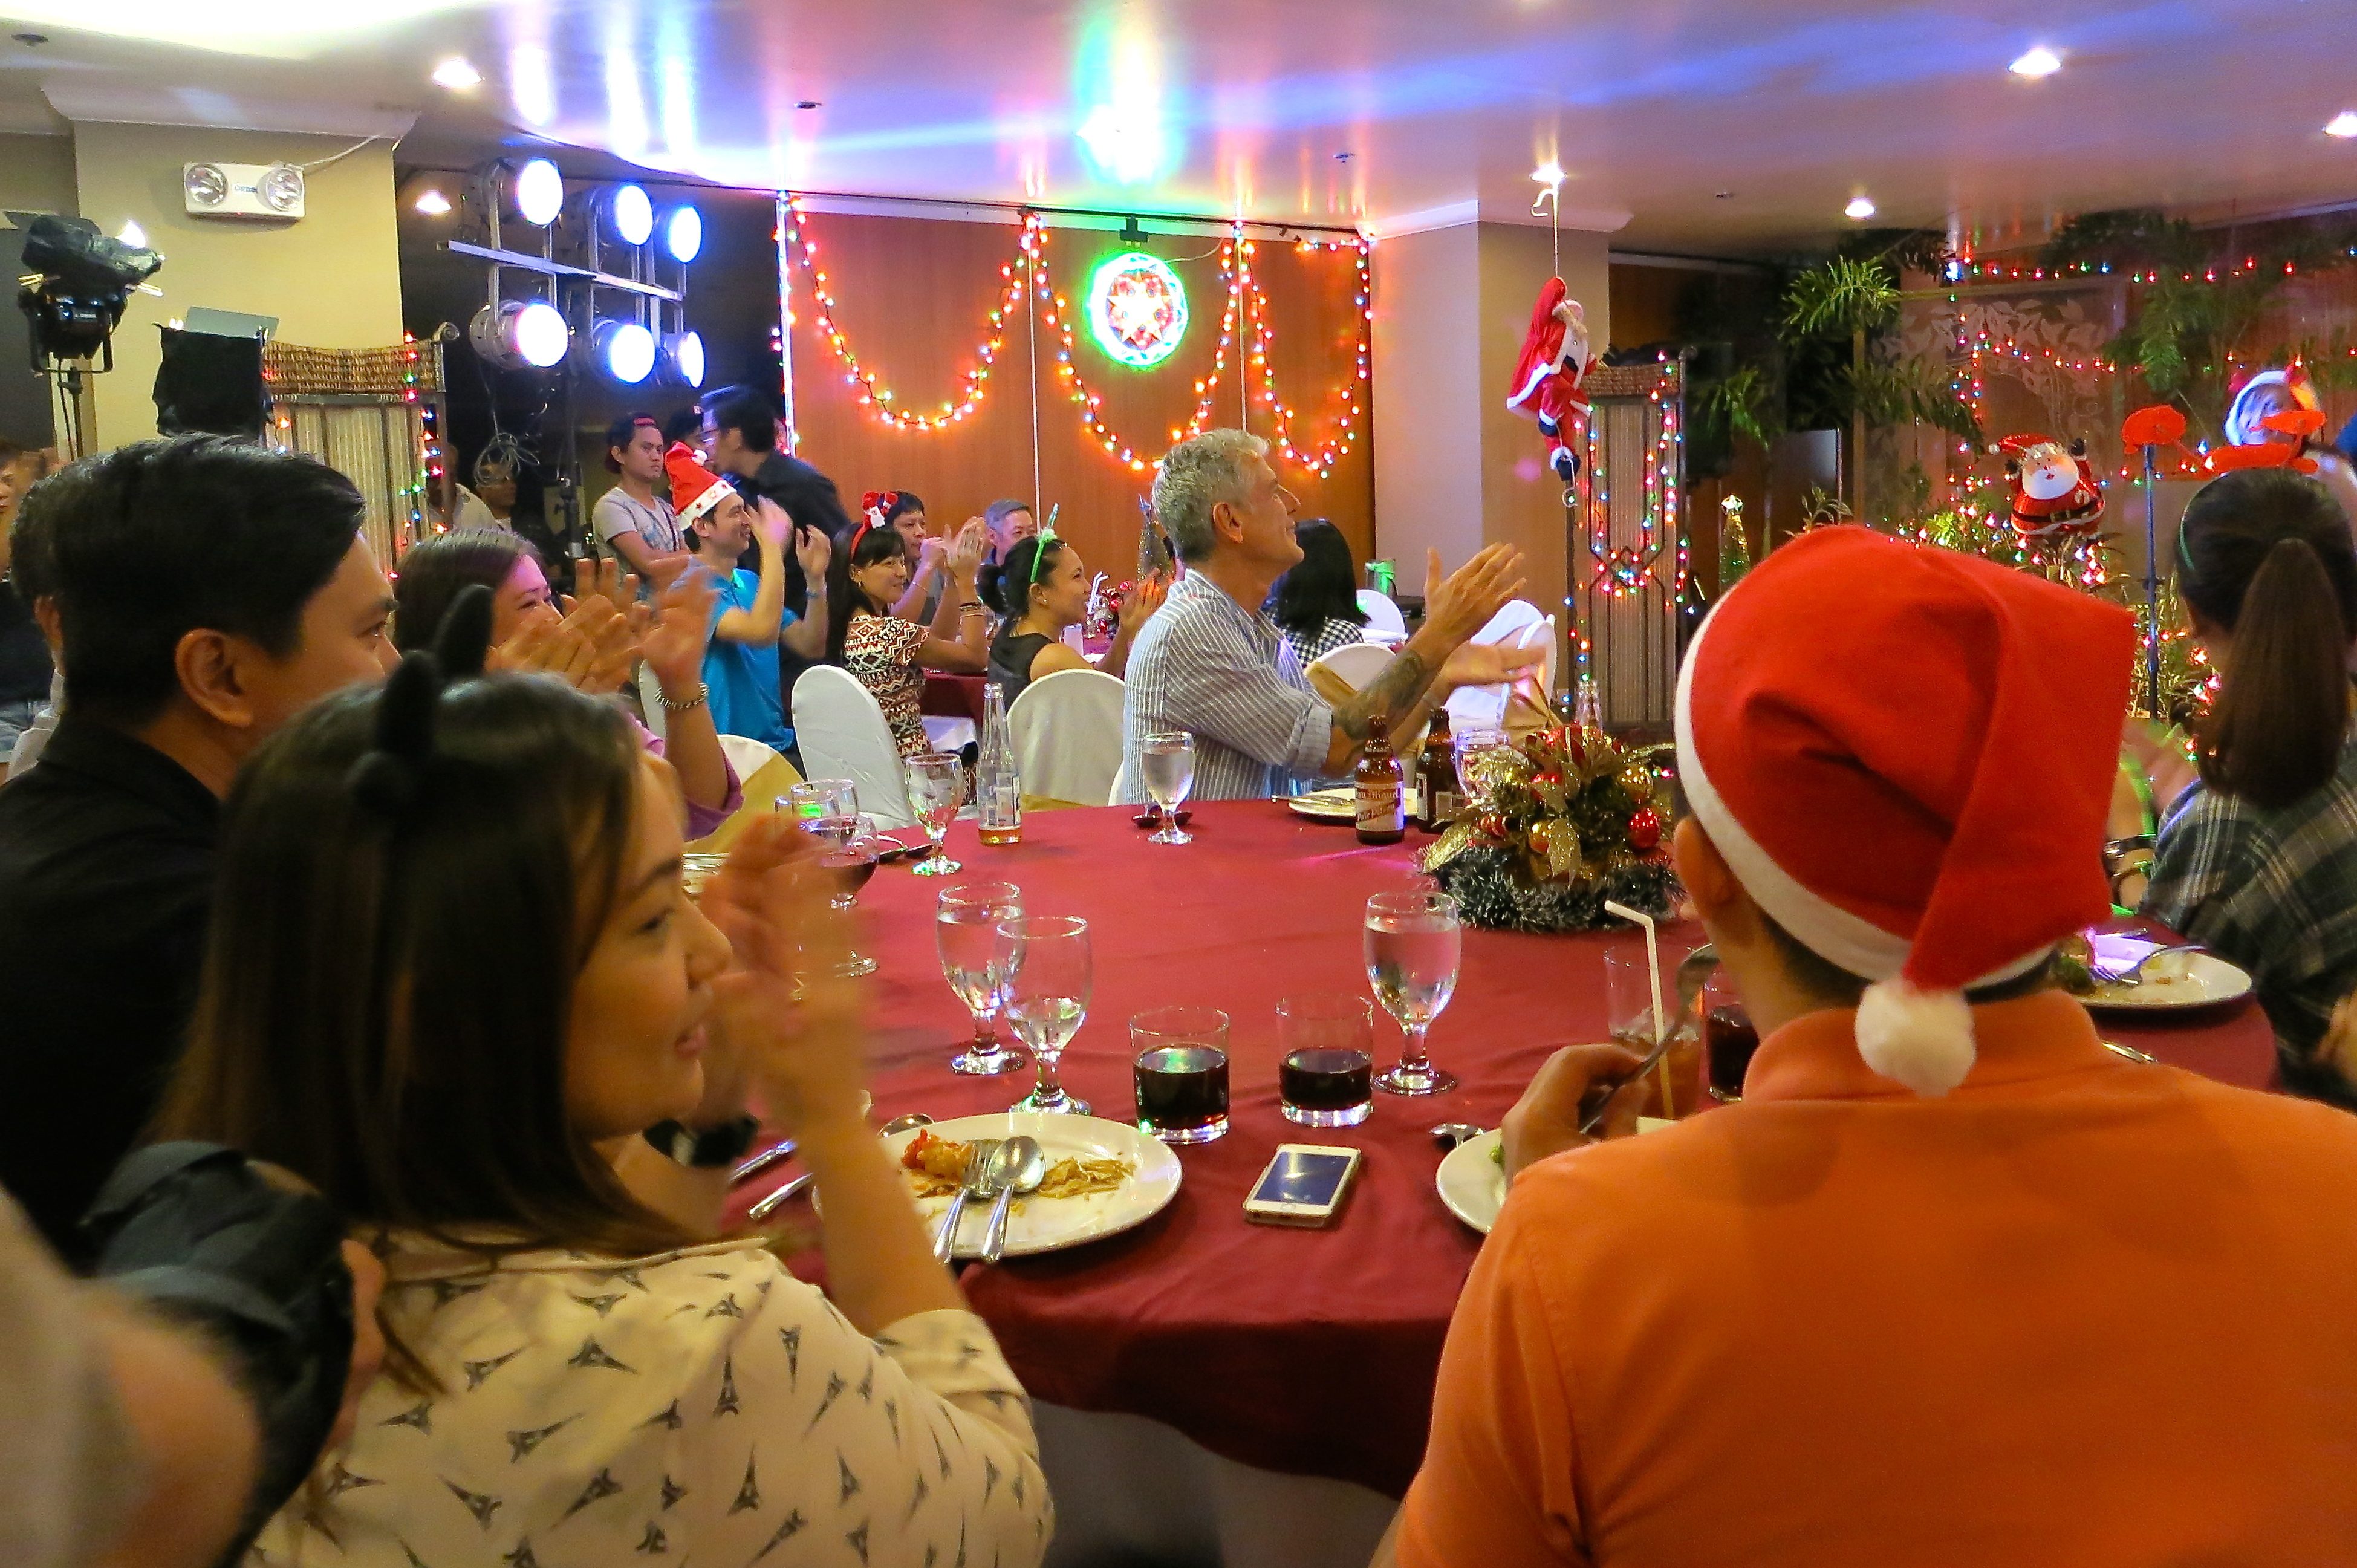 CHRISTMAS PARTY. Tony and the crowd applaud Regatta at the end of their set at a holiday office party in Manila. Photo courtesy of CNN  